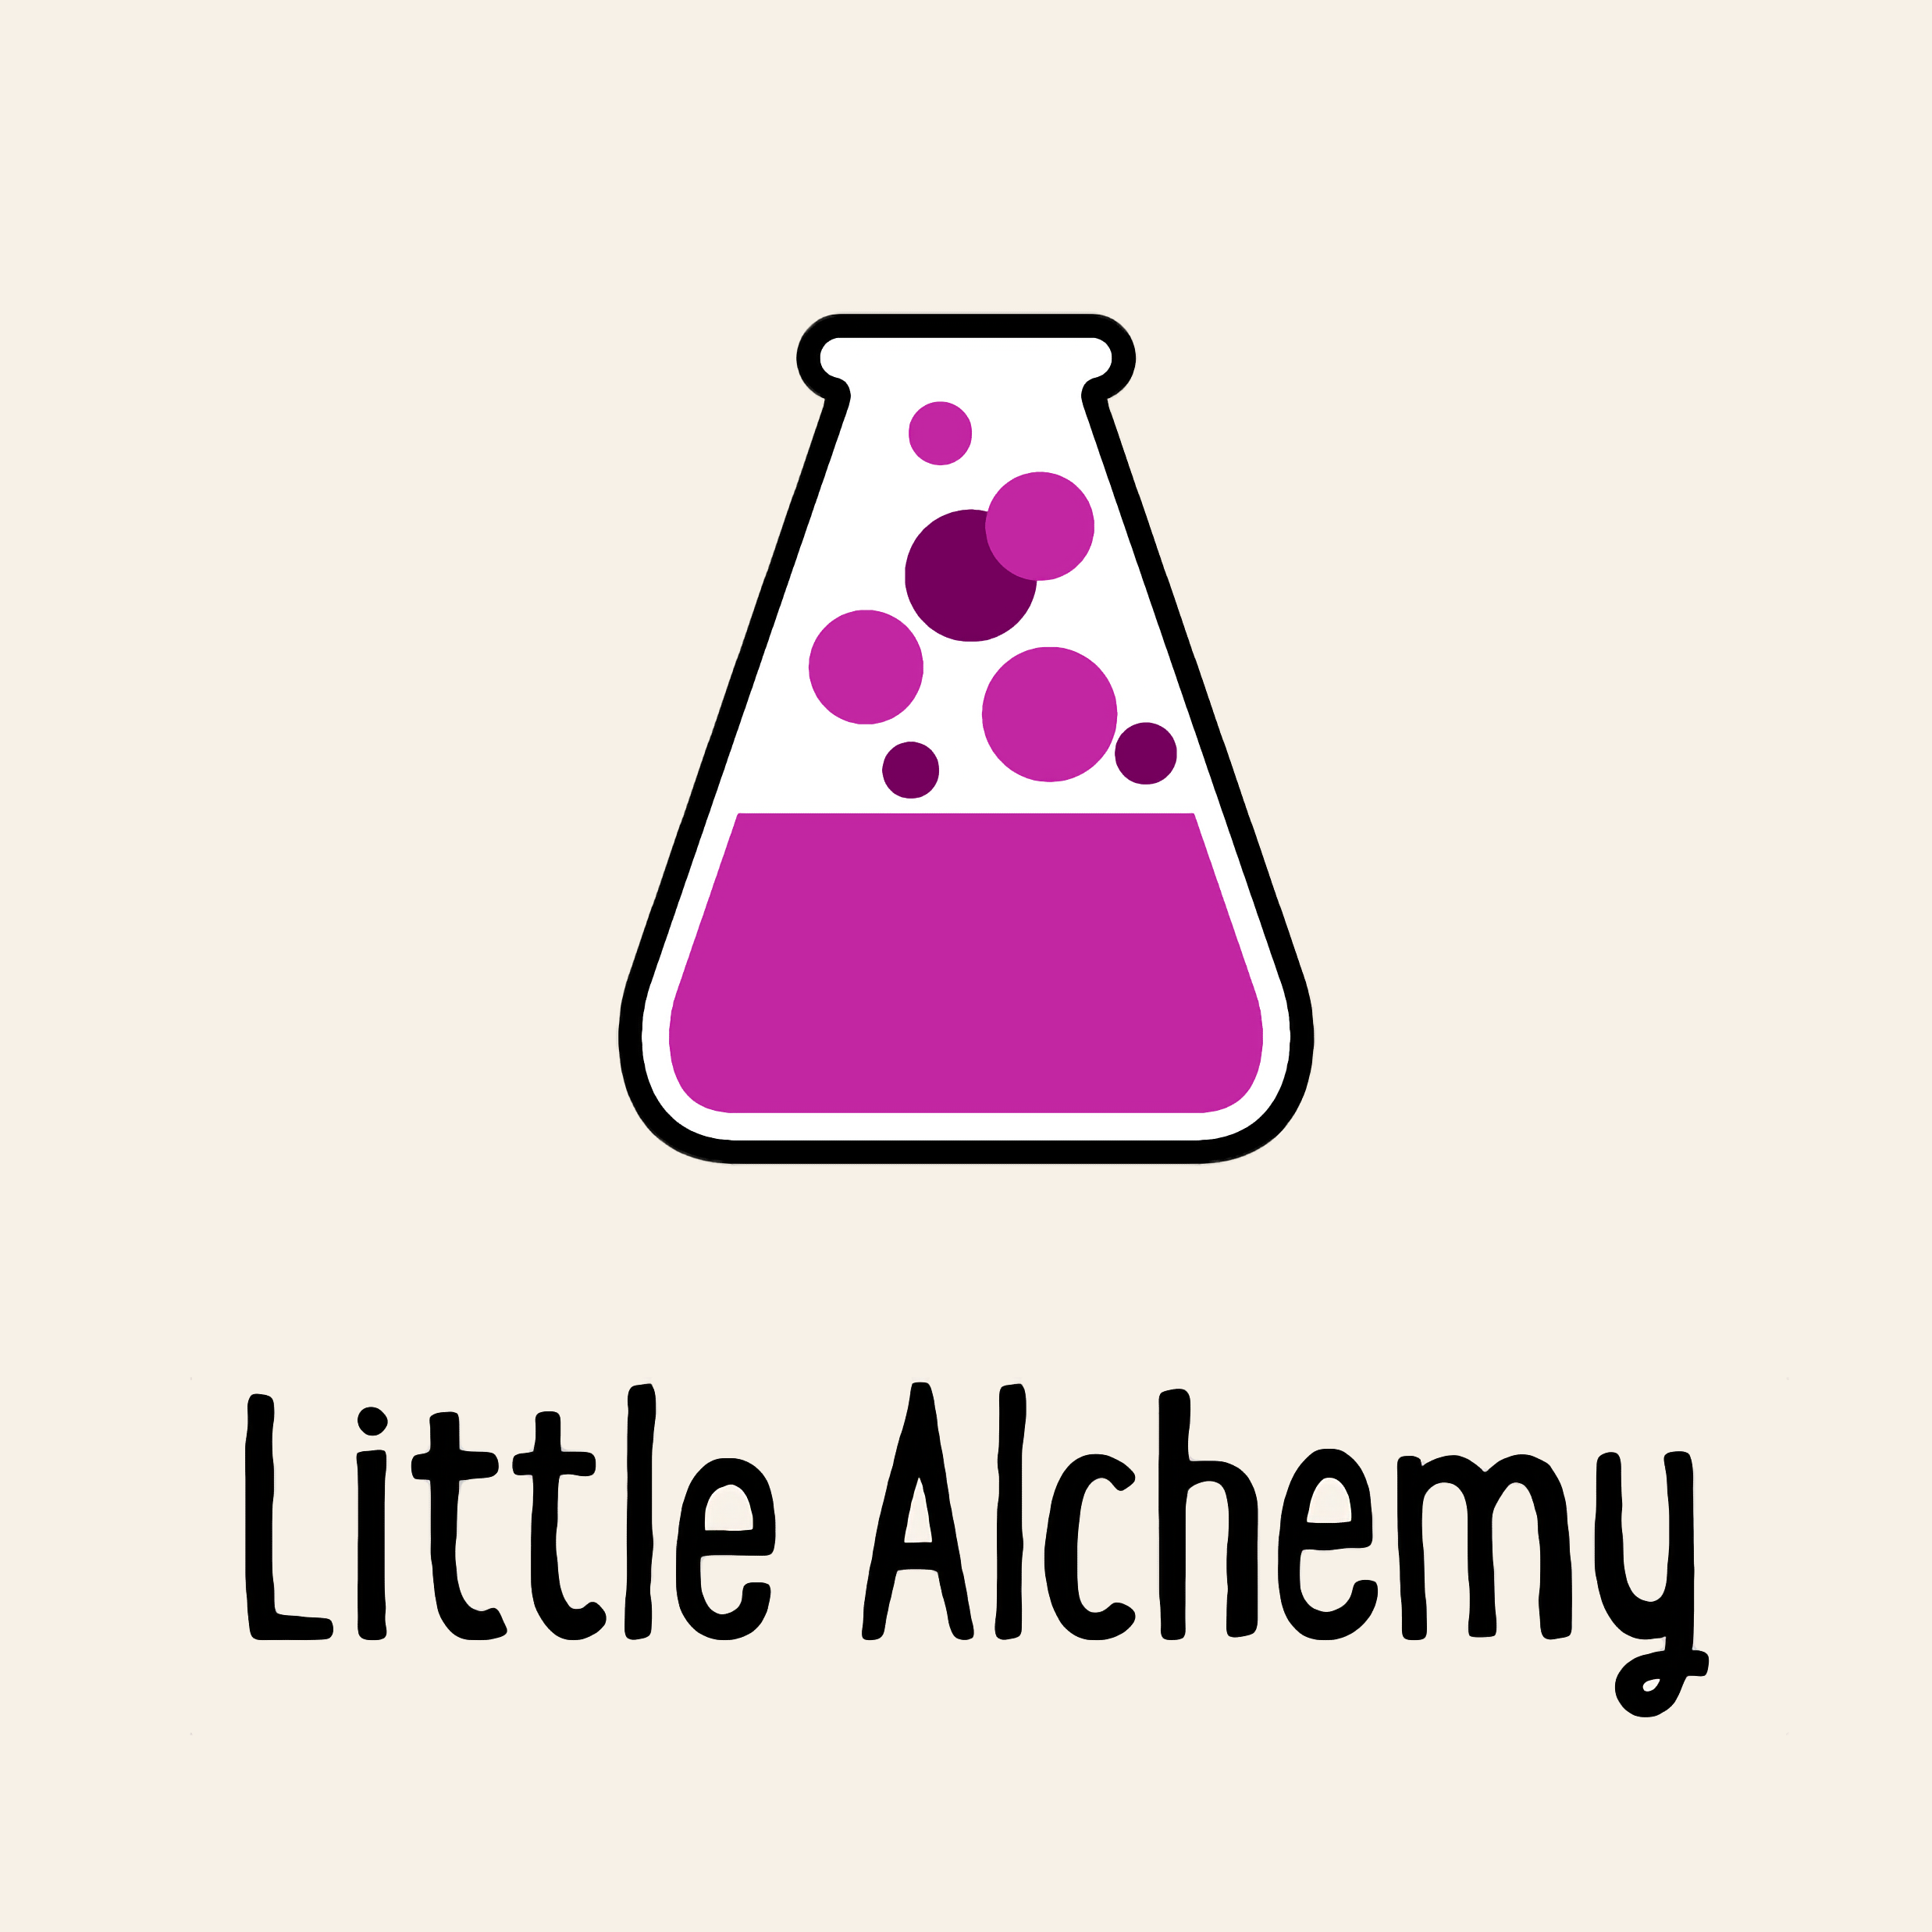 how to make a bee in little alchemy